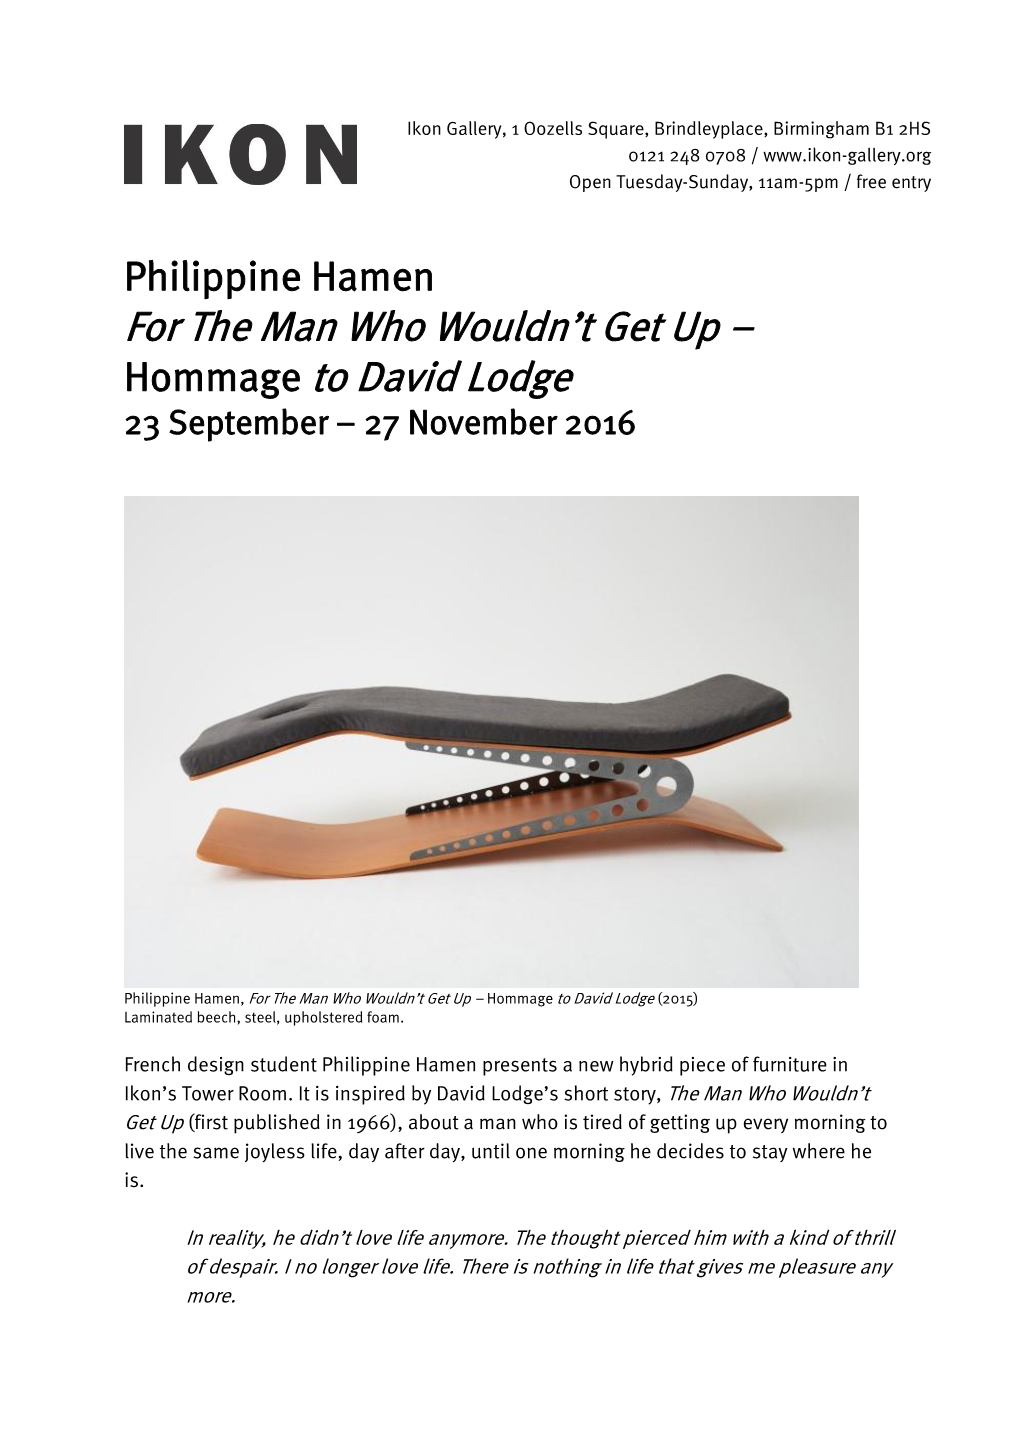 Philippine Hamen for the Man Who Wouldn’T Get up – Hommage to David Lodge 23 September – 27 November 2016